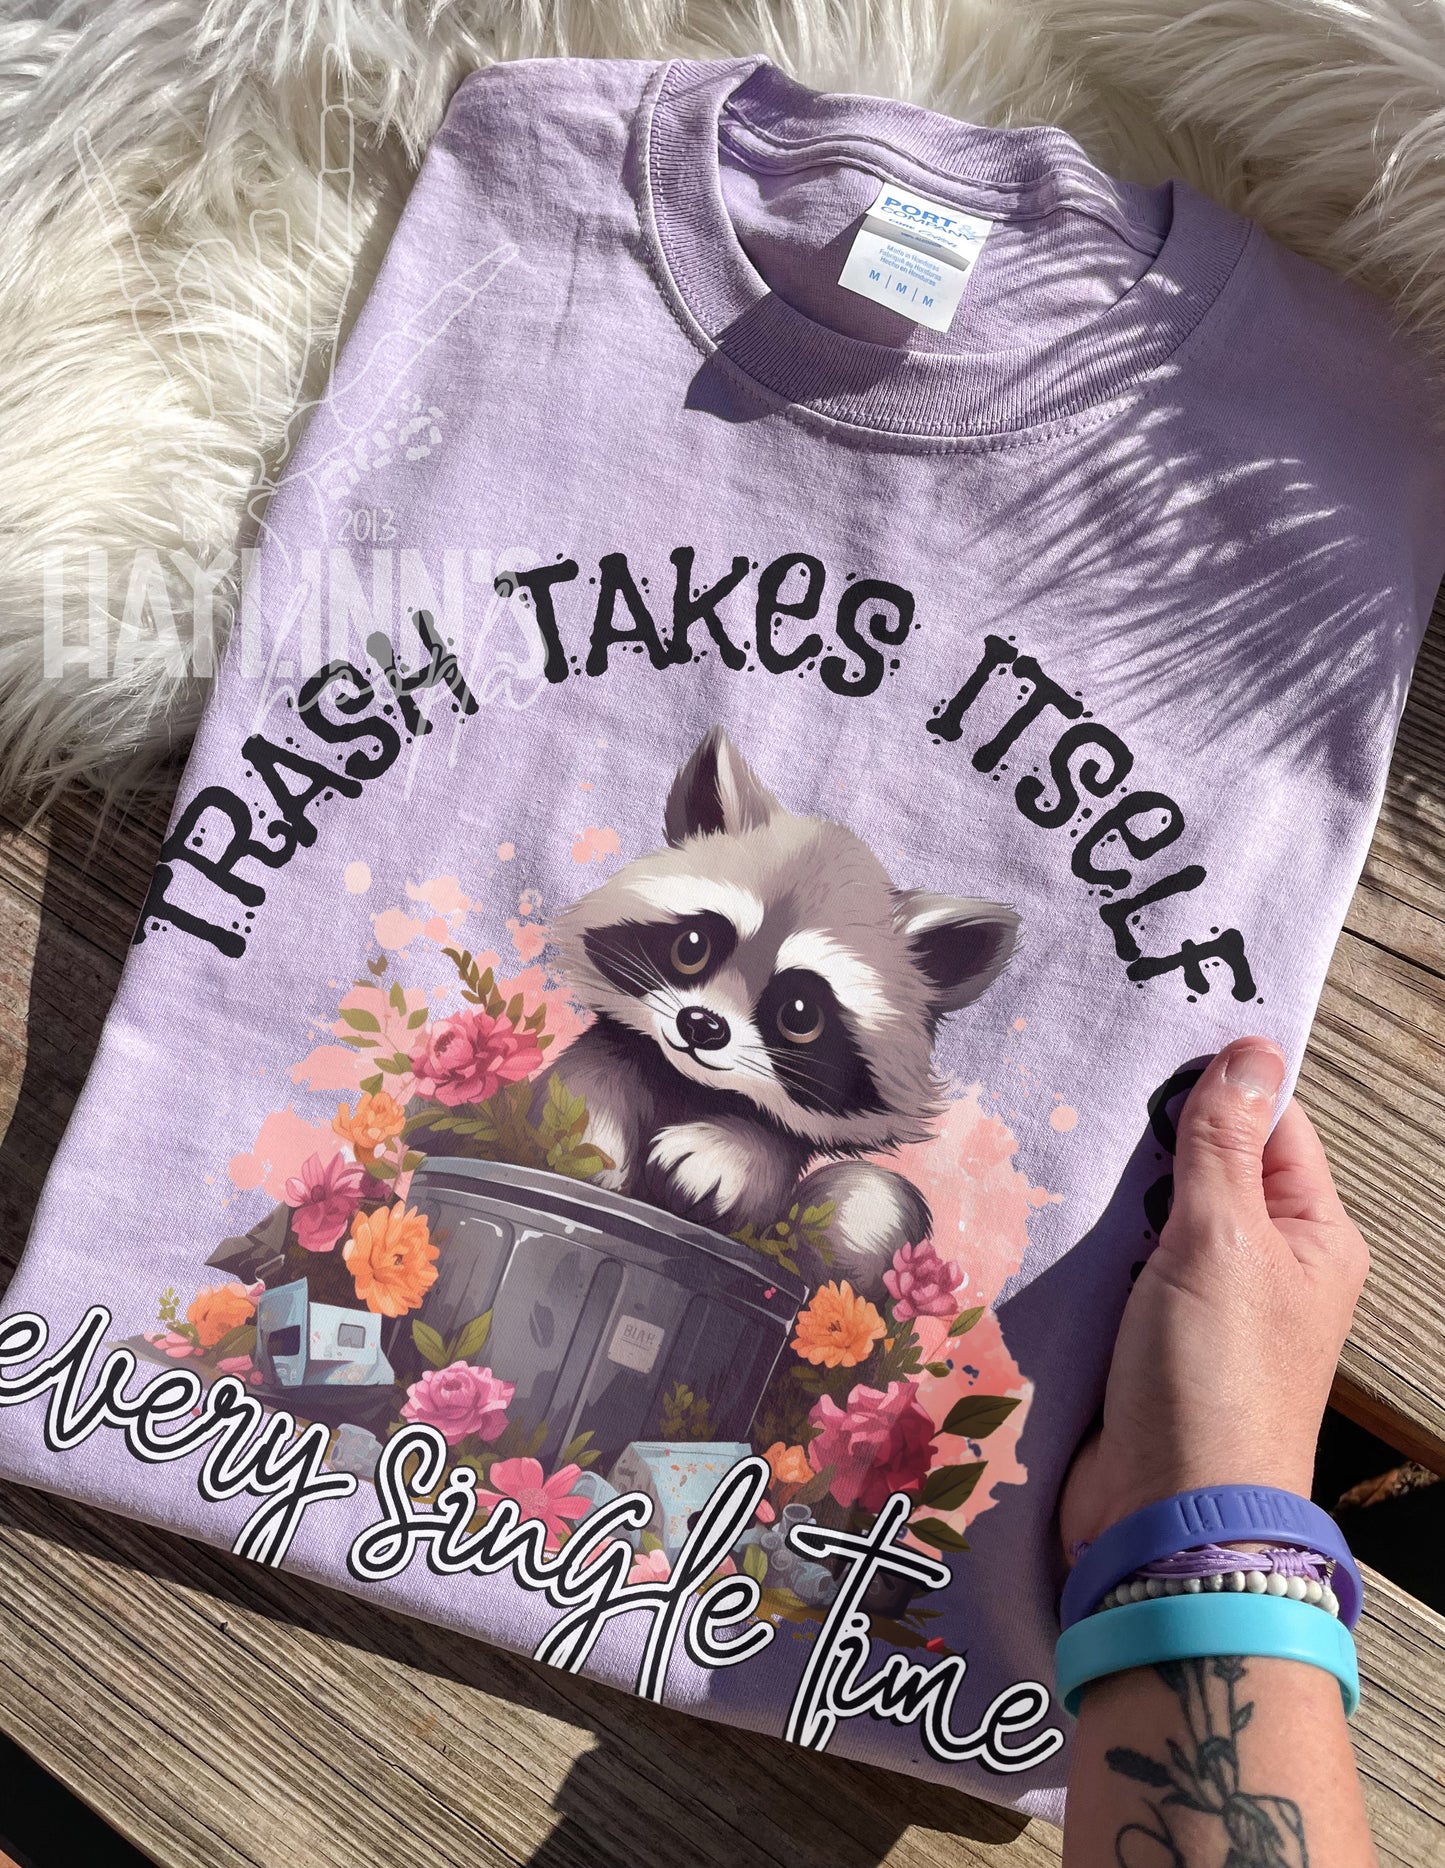 Trash Takes Itself Out {Every Single Time} Tee